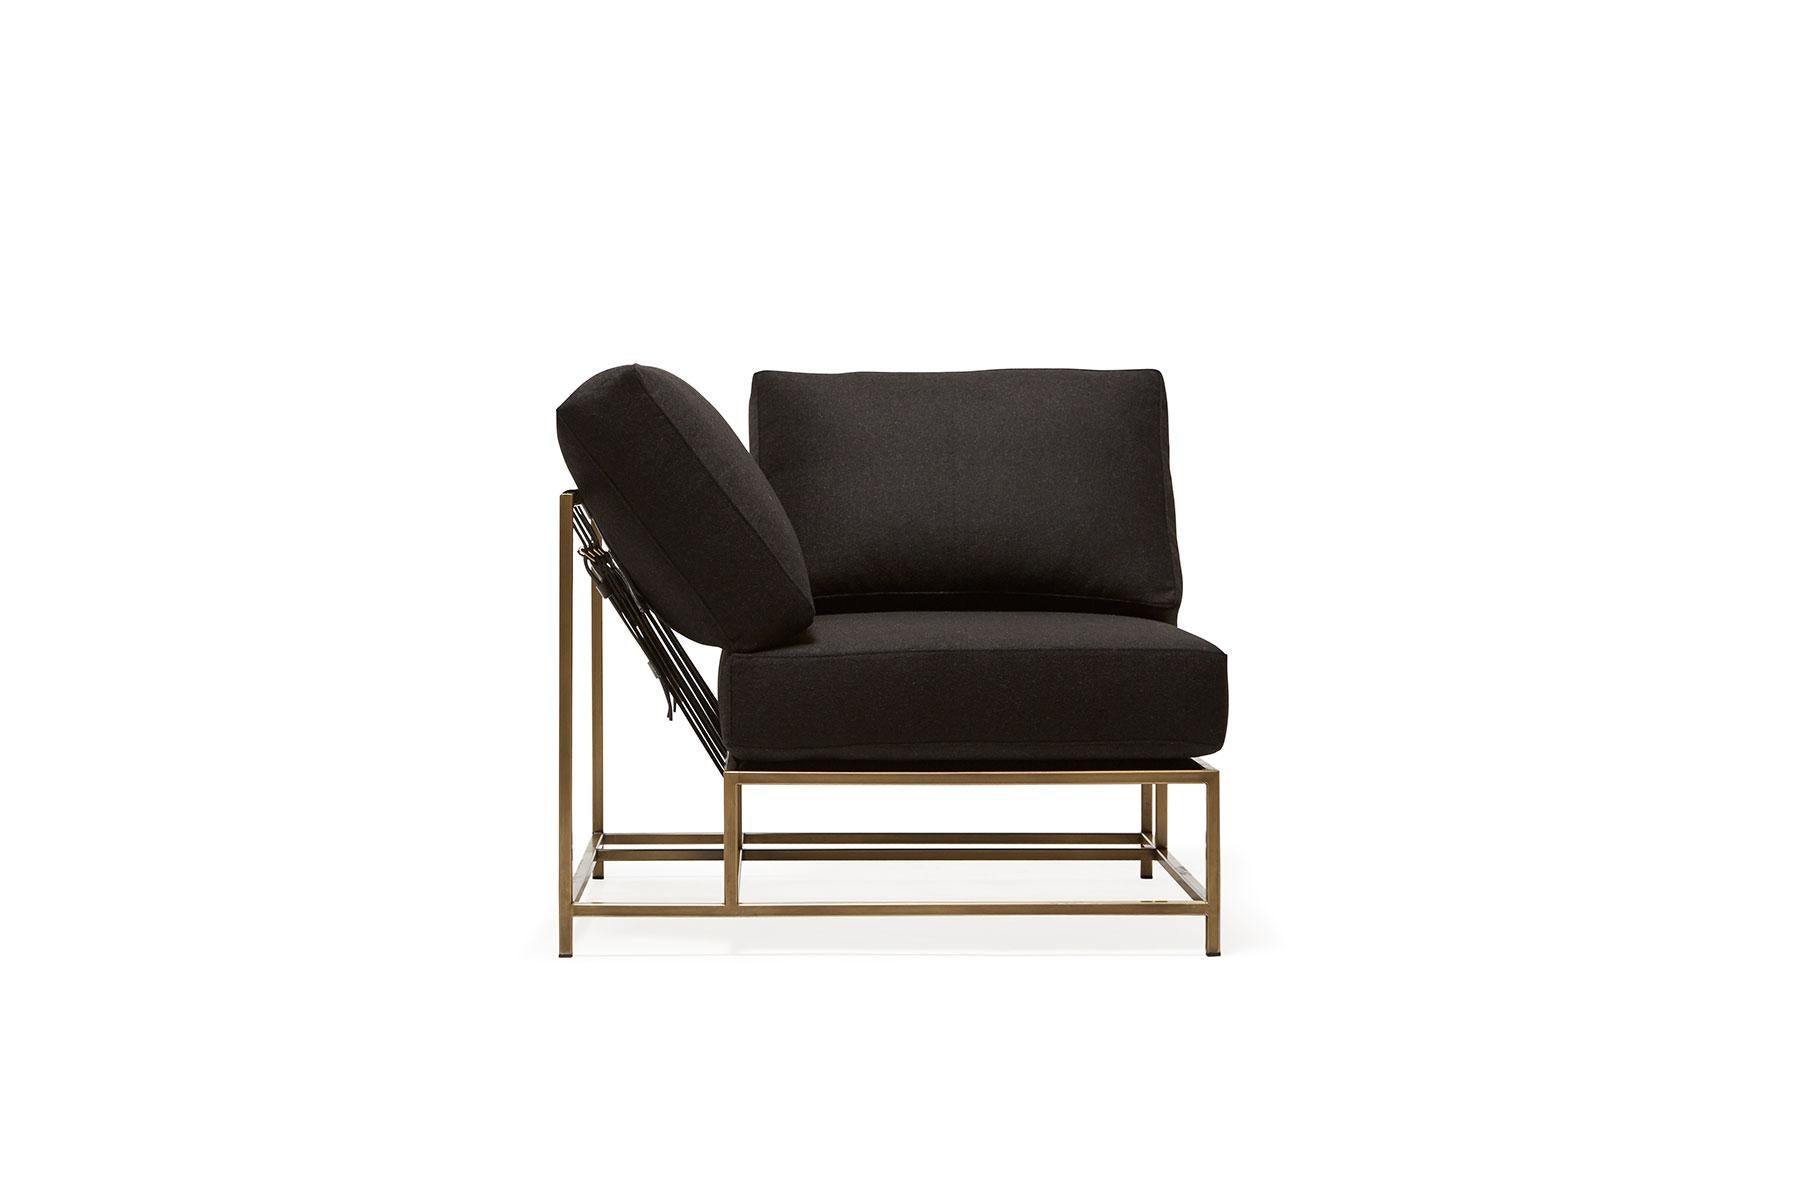 The Inheritance Corner Chair can be used as a standalone piece, or as part of a modular sectional with other Inheritance pieces.

This variation is upholstered in a rich, black wool blend fabric. The foam seat cushions have been wrapped in